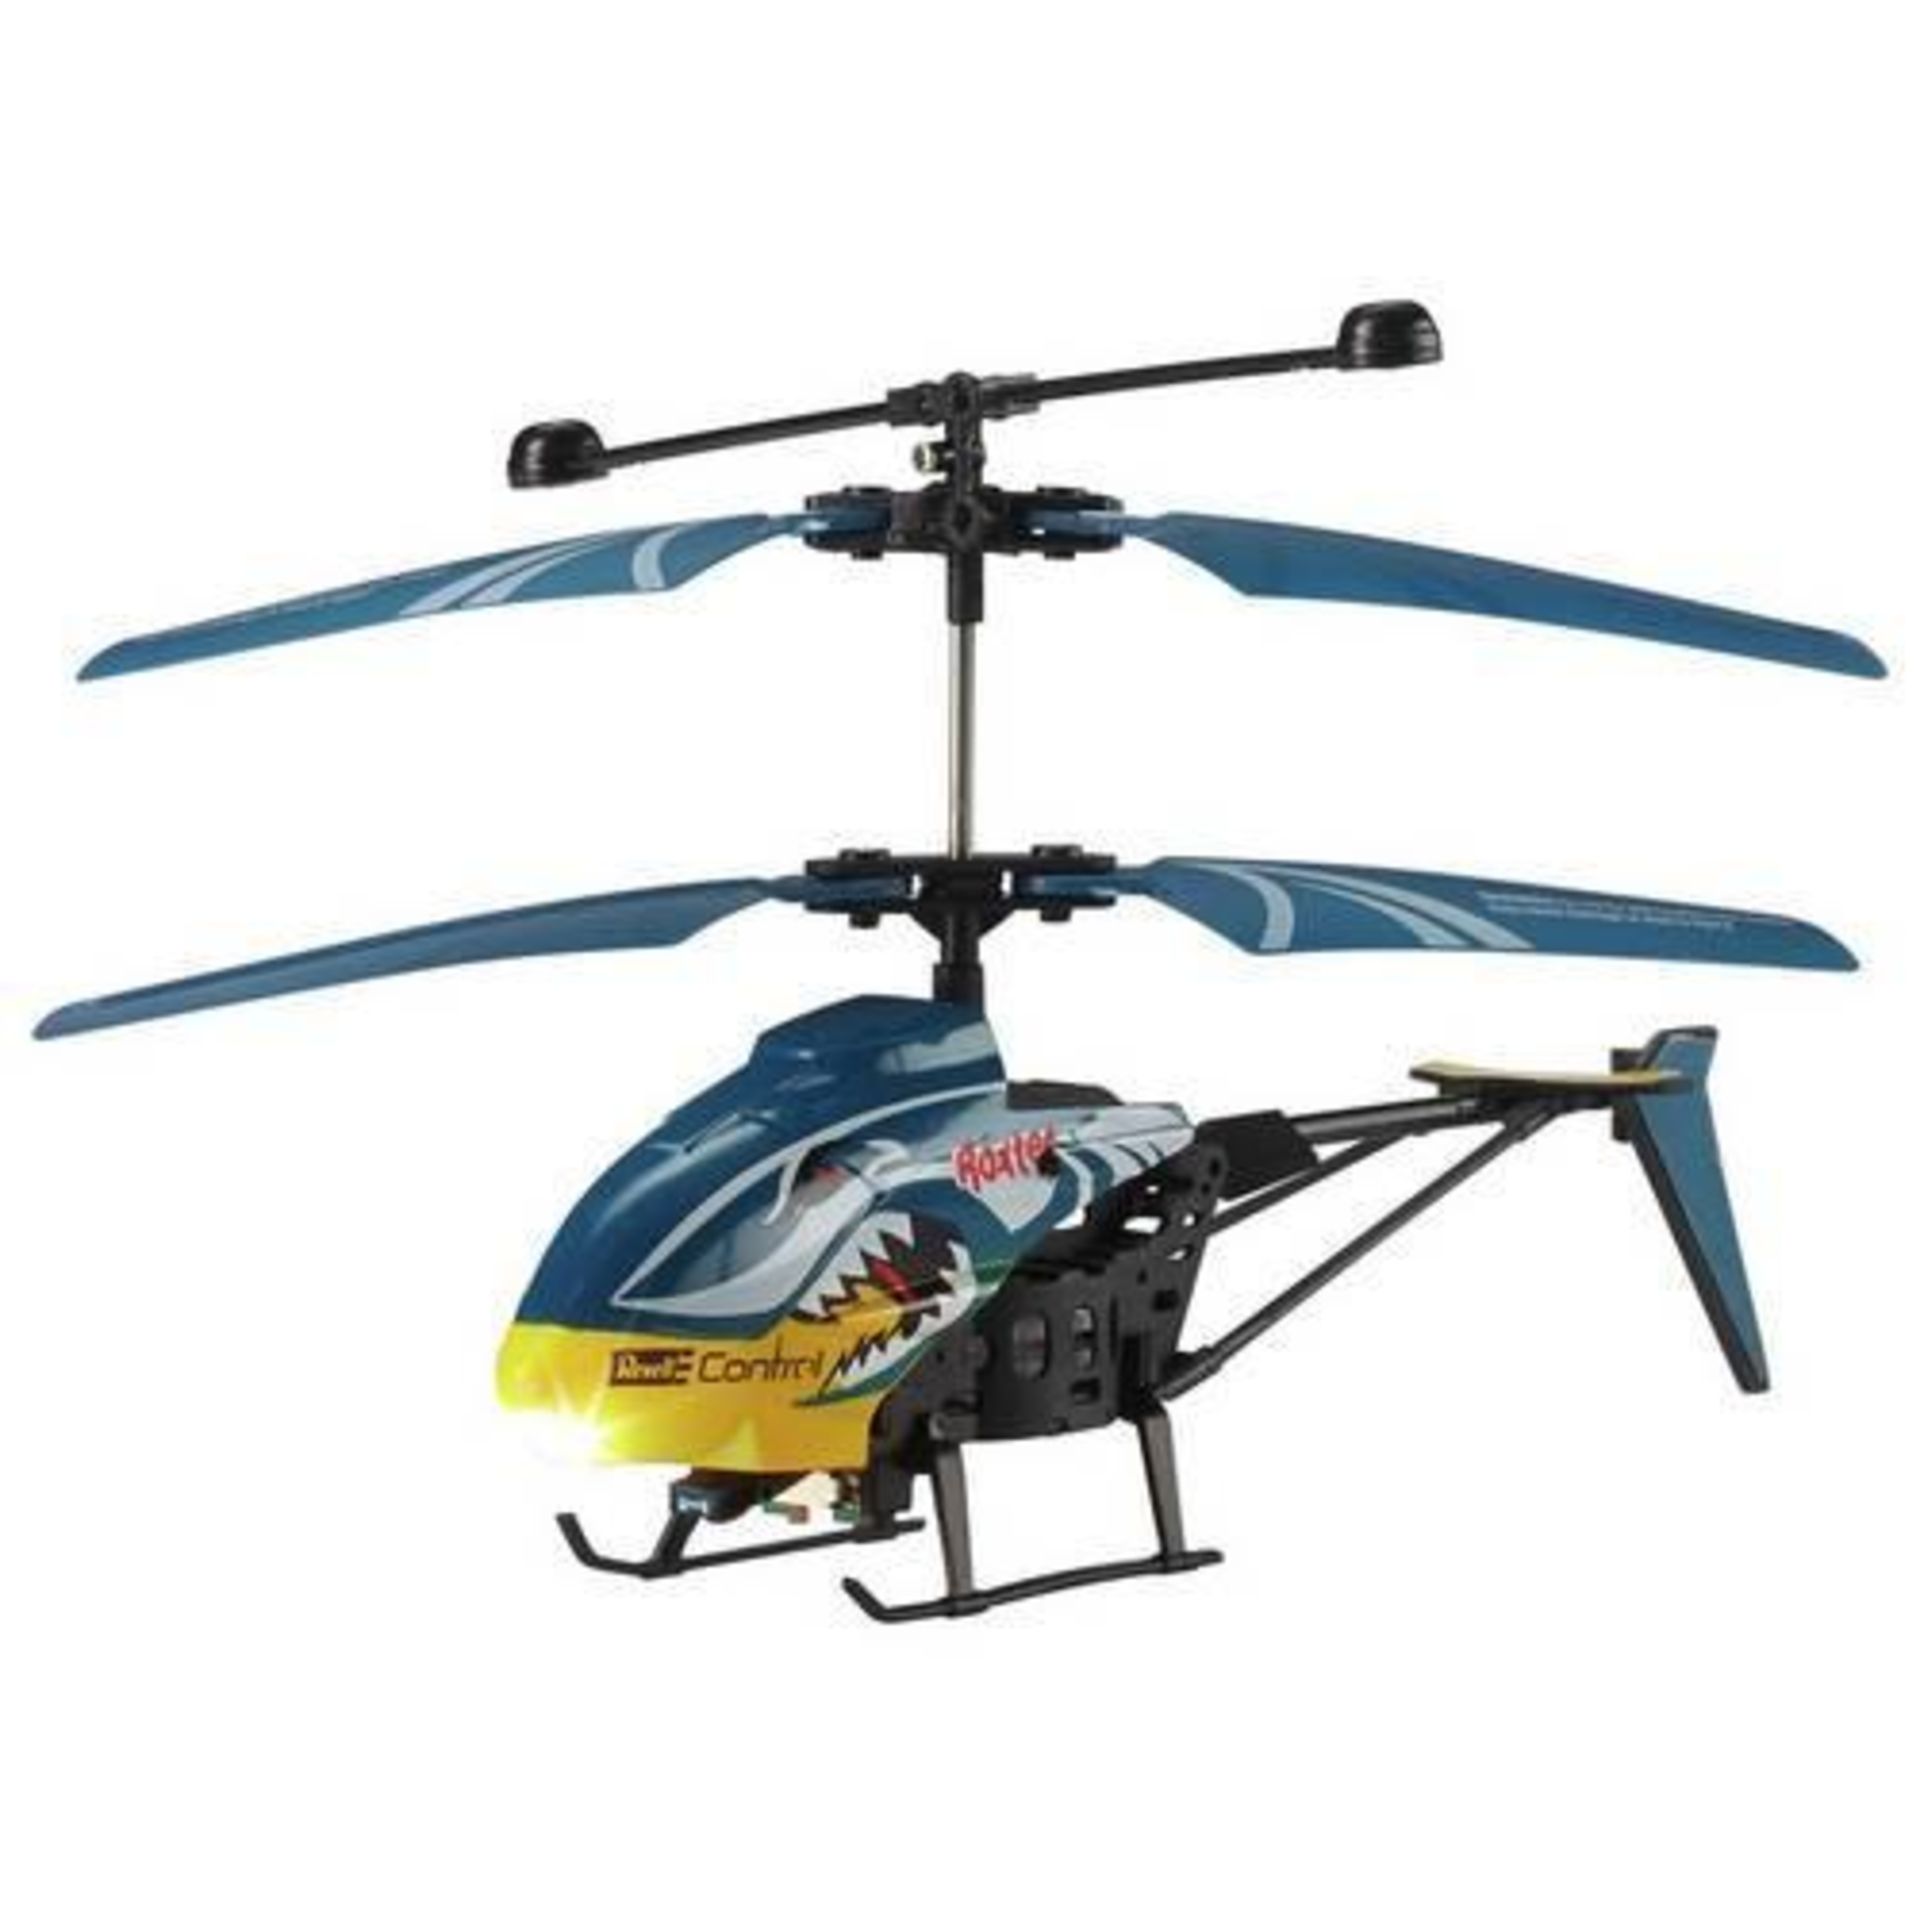 Revell Control RC Roxter Helicopter 711/6234 £13.00 RRP